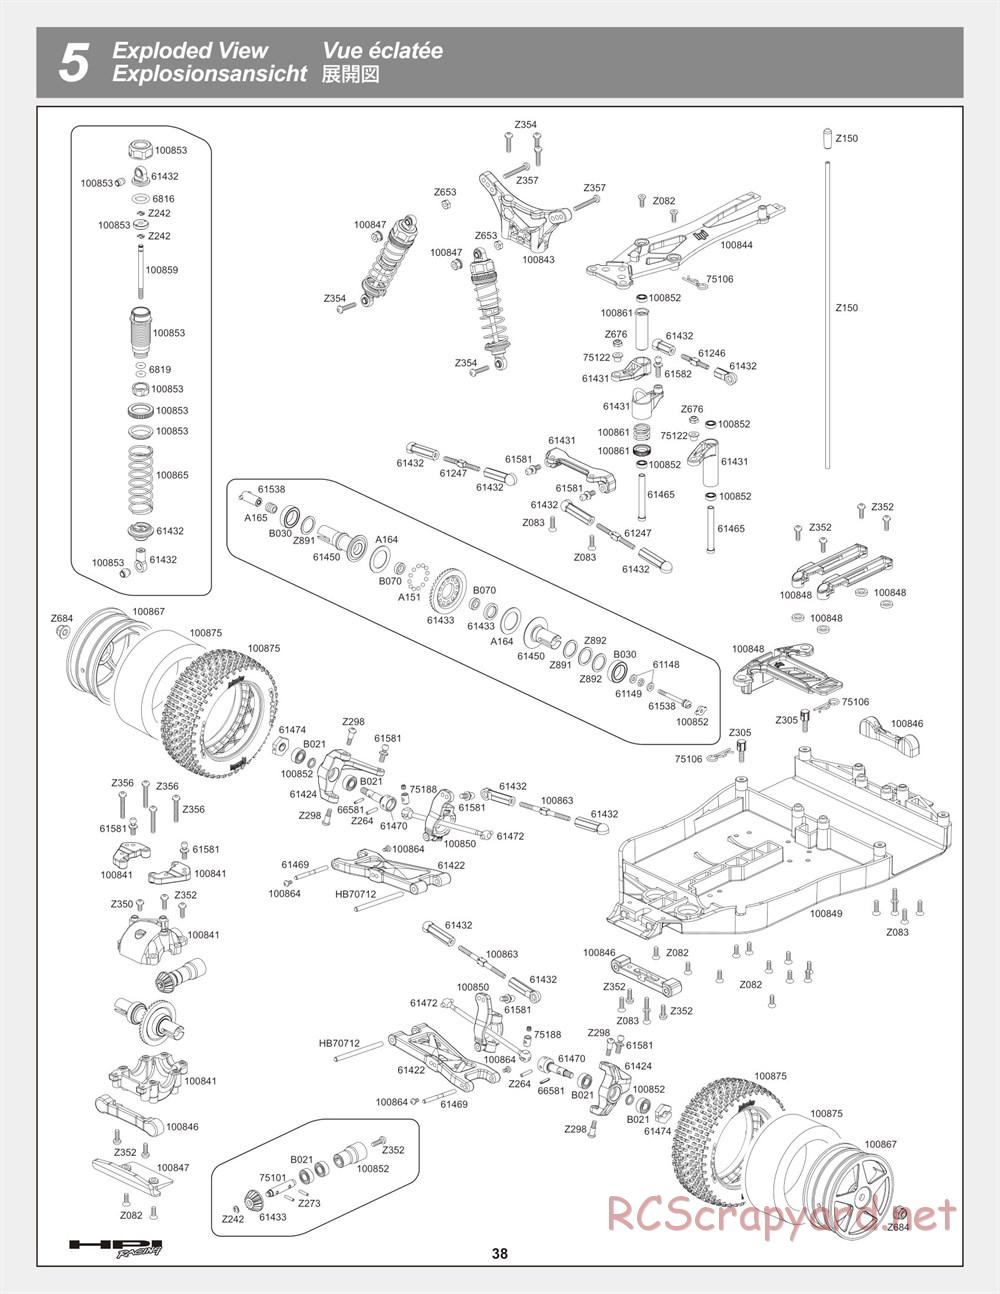 HPI - Cyber 10B - Exploded View - Page 38